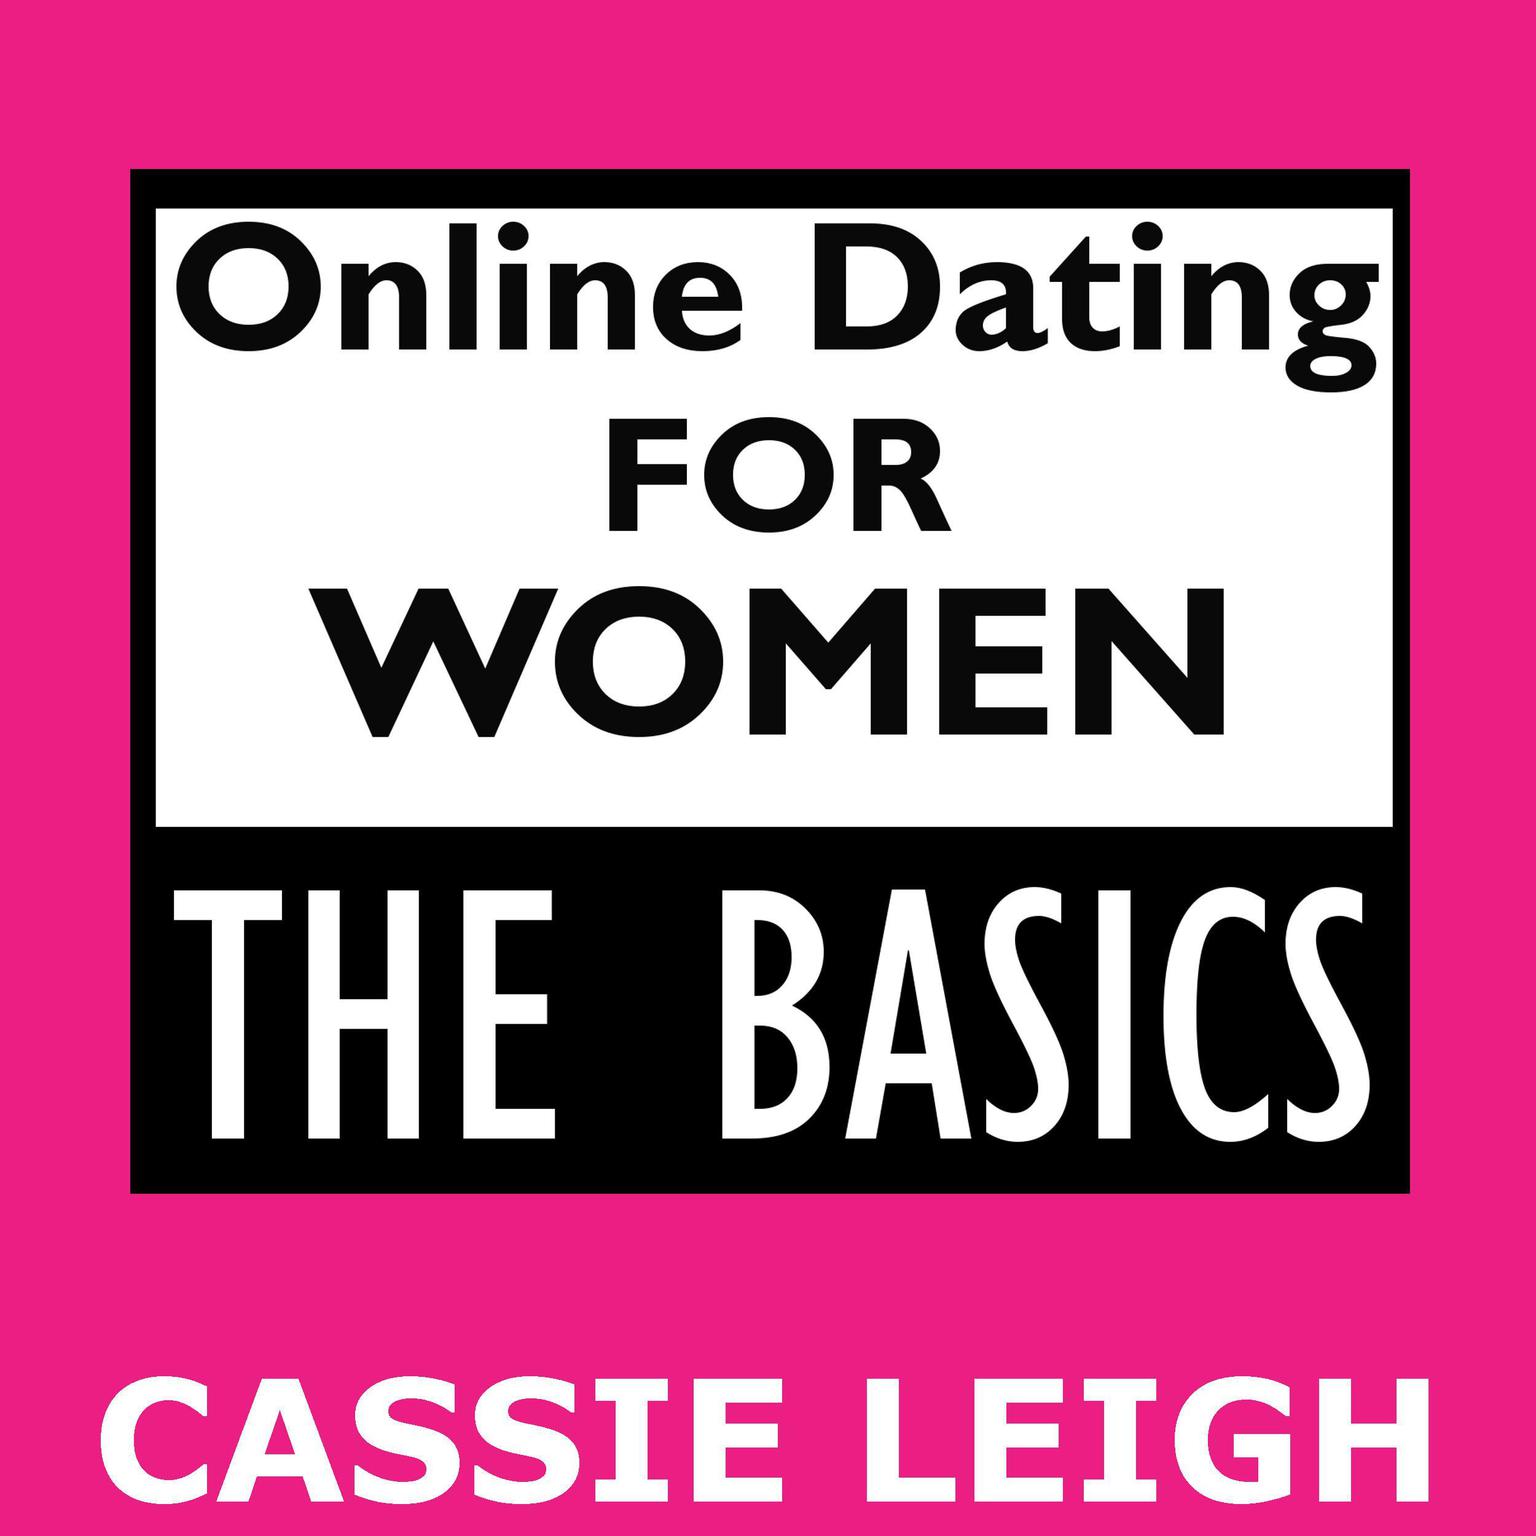 Online Dating for Women: The Basics: The Basics Audiobook, by Cassie Leigh